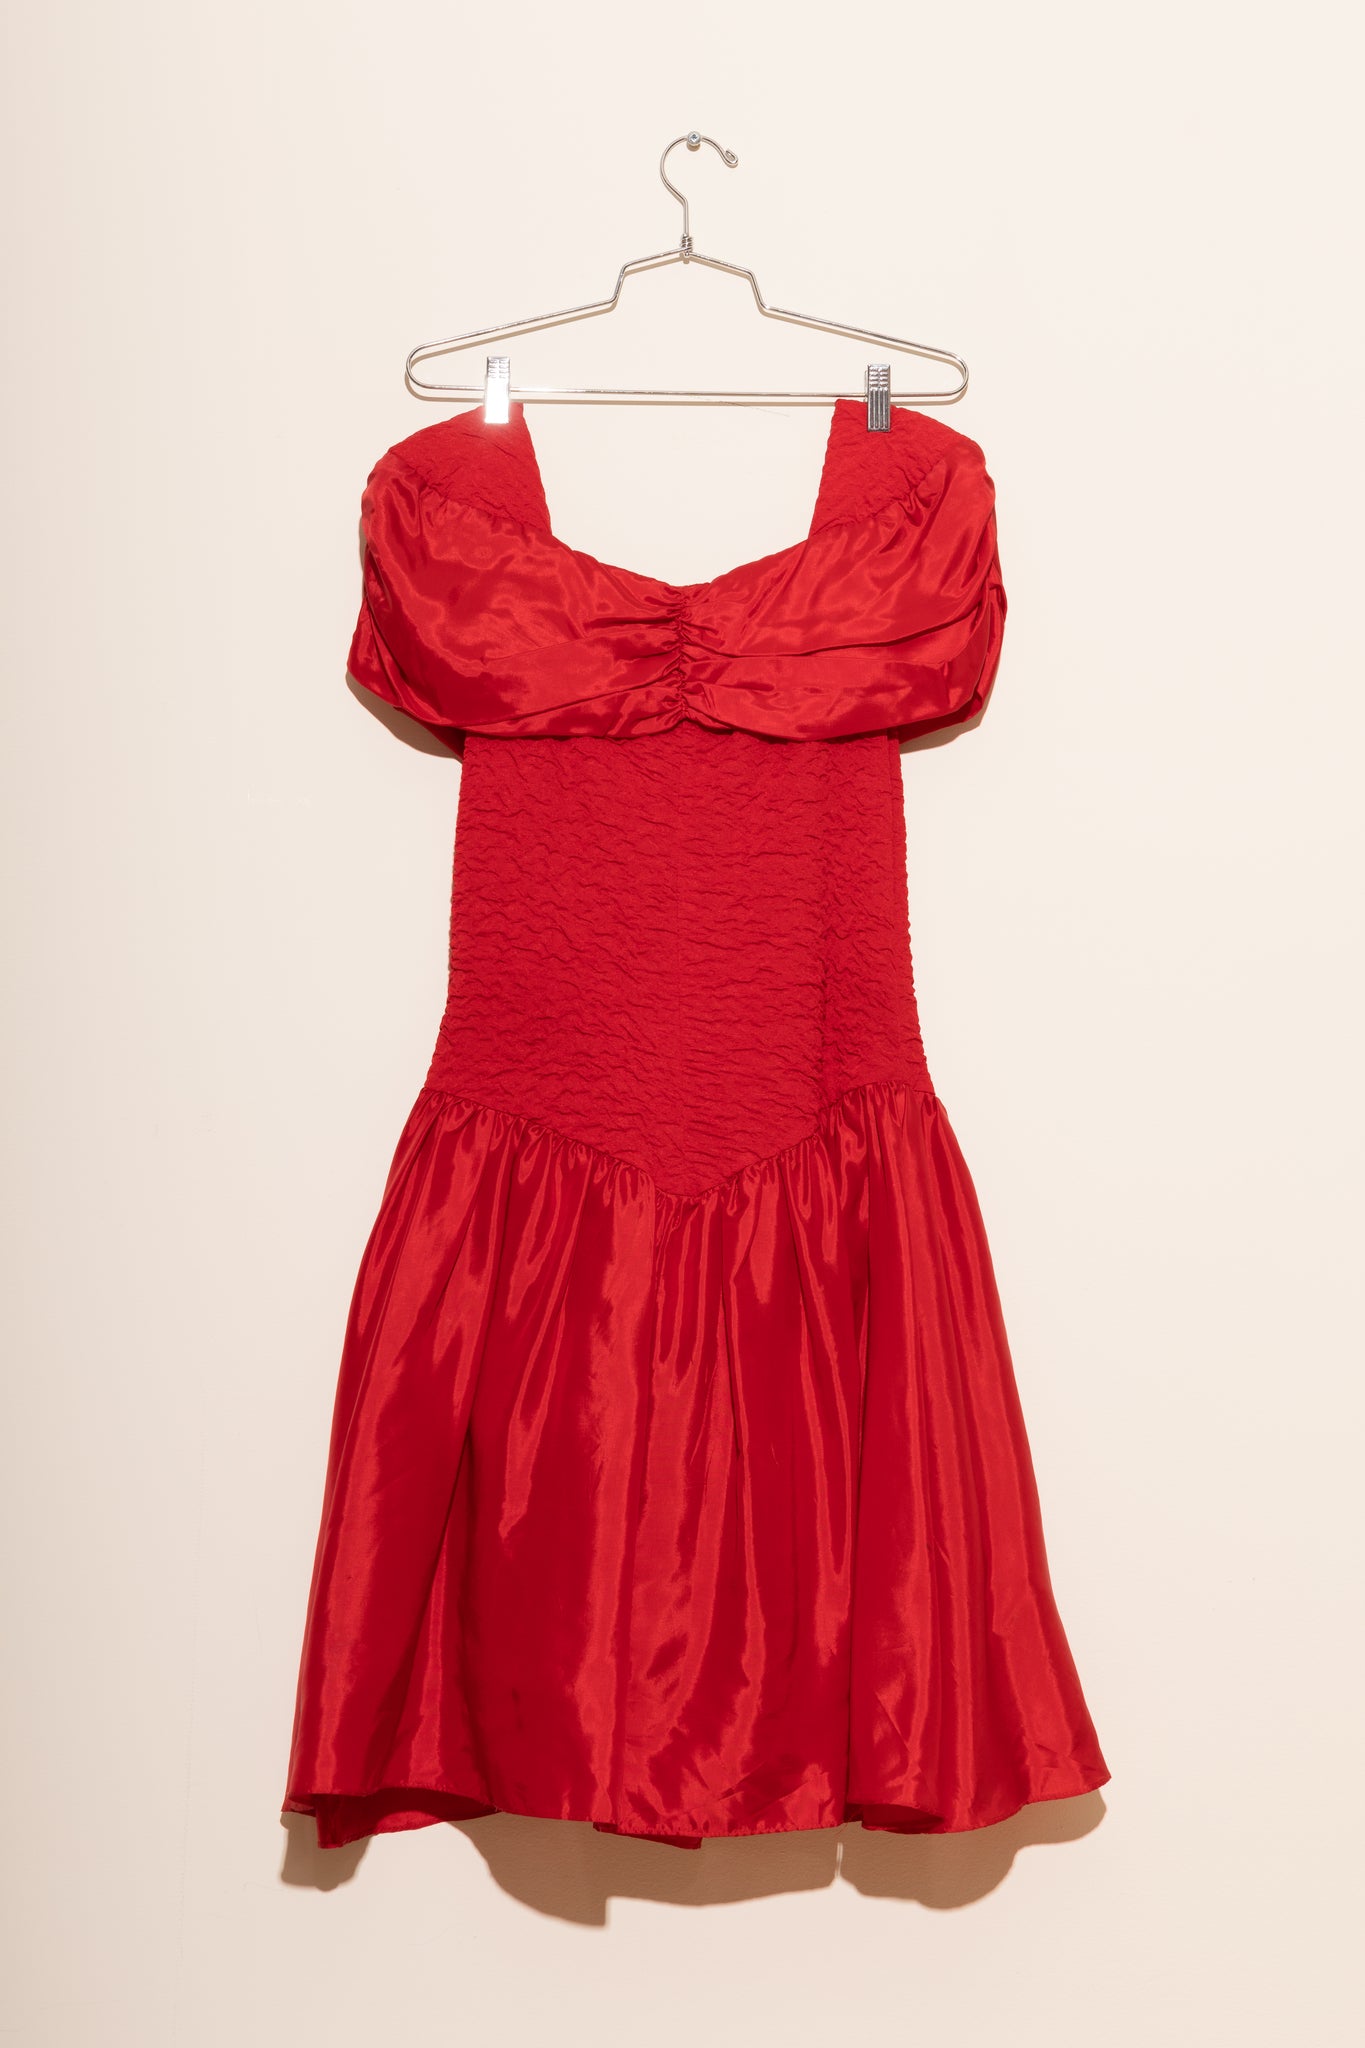 Off-the-Shoulder Red Party Dress (S-M)